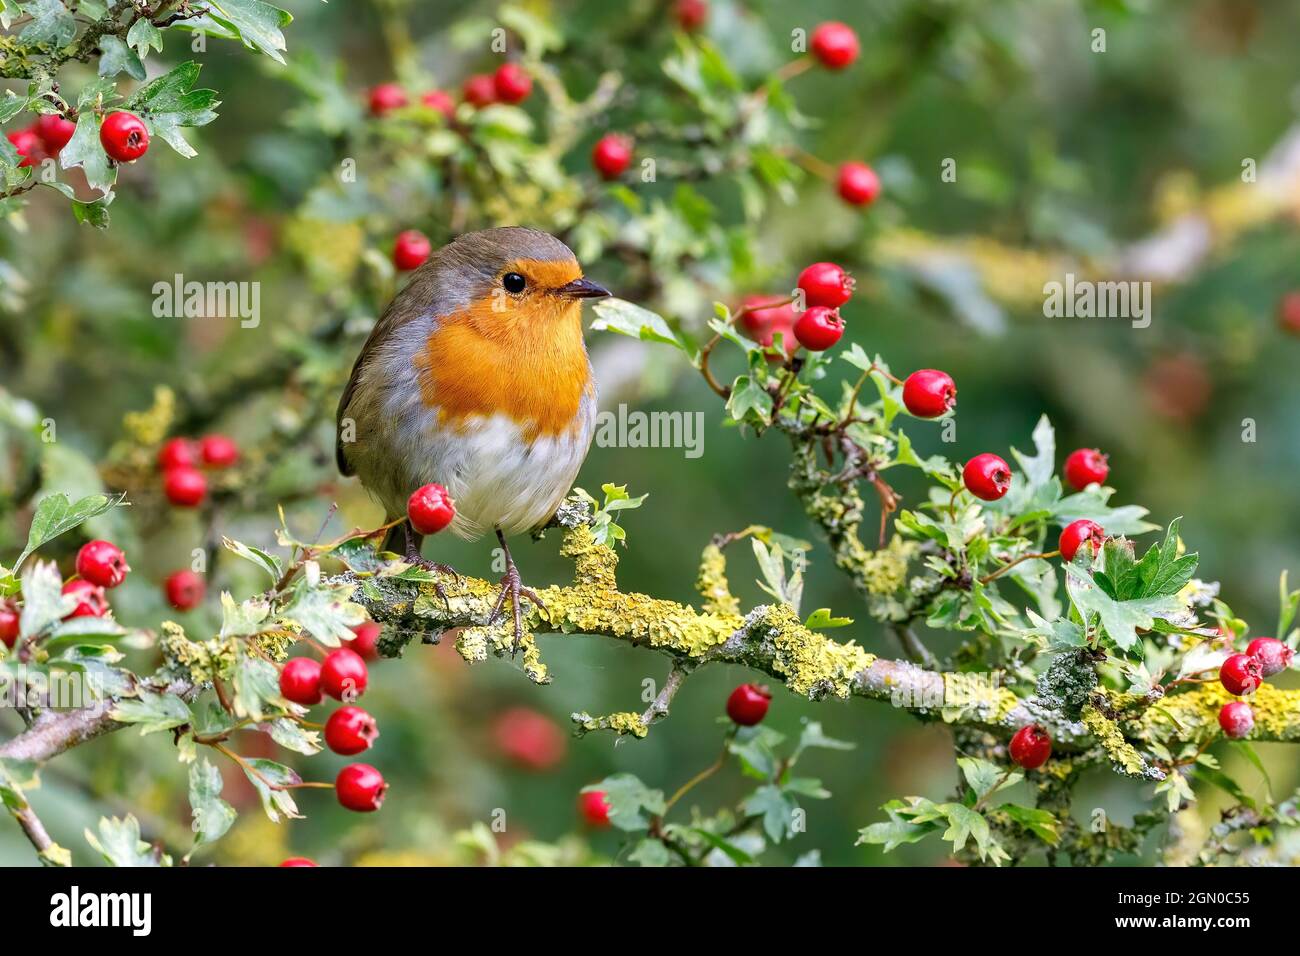 European Robin (Erithacus rubecula) in a hawthorn bush with red berries, uk Stock Photo